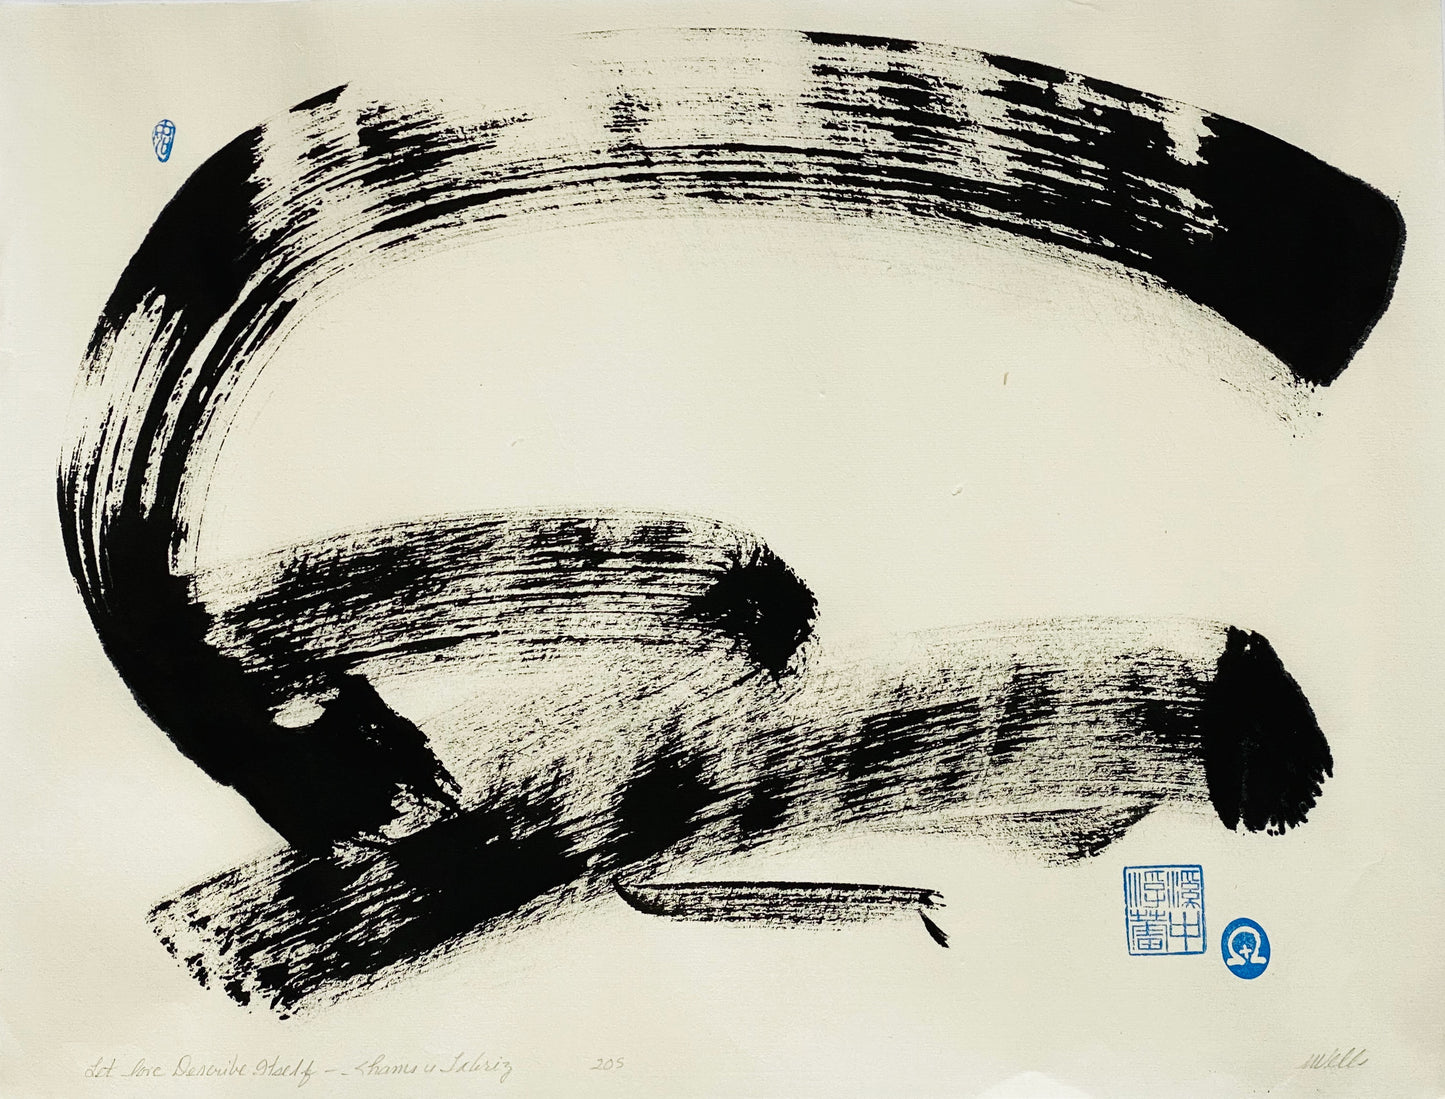 "Let Love Describe Itself" by Marilyn Wells - Original Abstract Sumi e & ink washes Painting